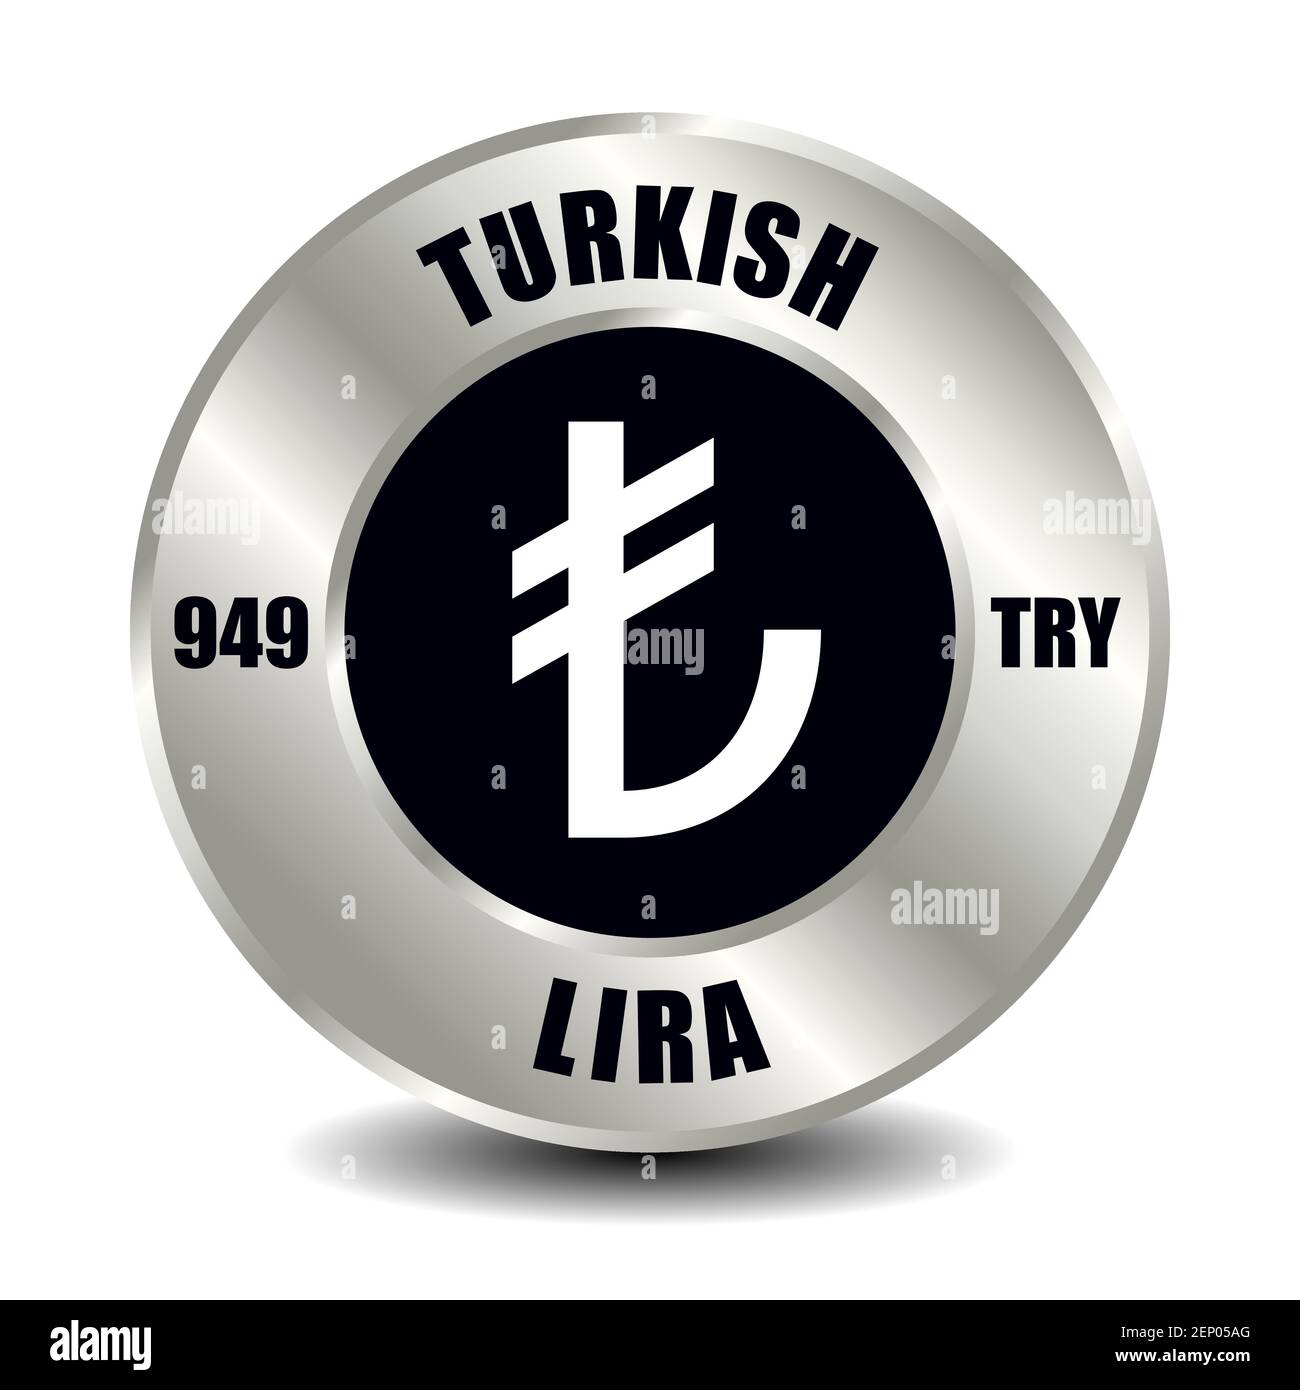 Turkey money icon isolated on round silver coin. Vector sign of currency symbol with international ISO code and abbreviation Stock Vector